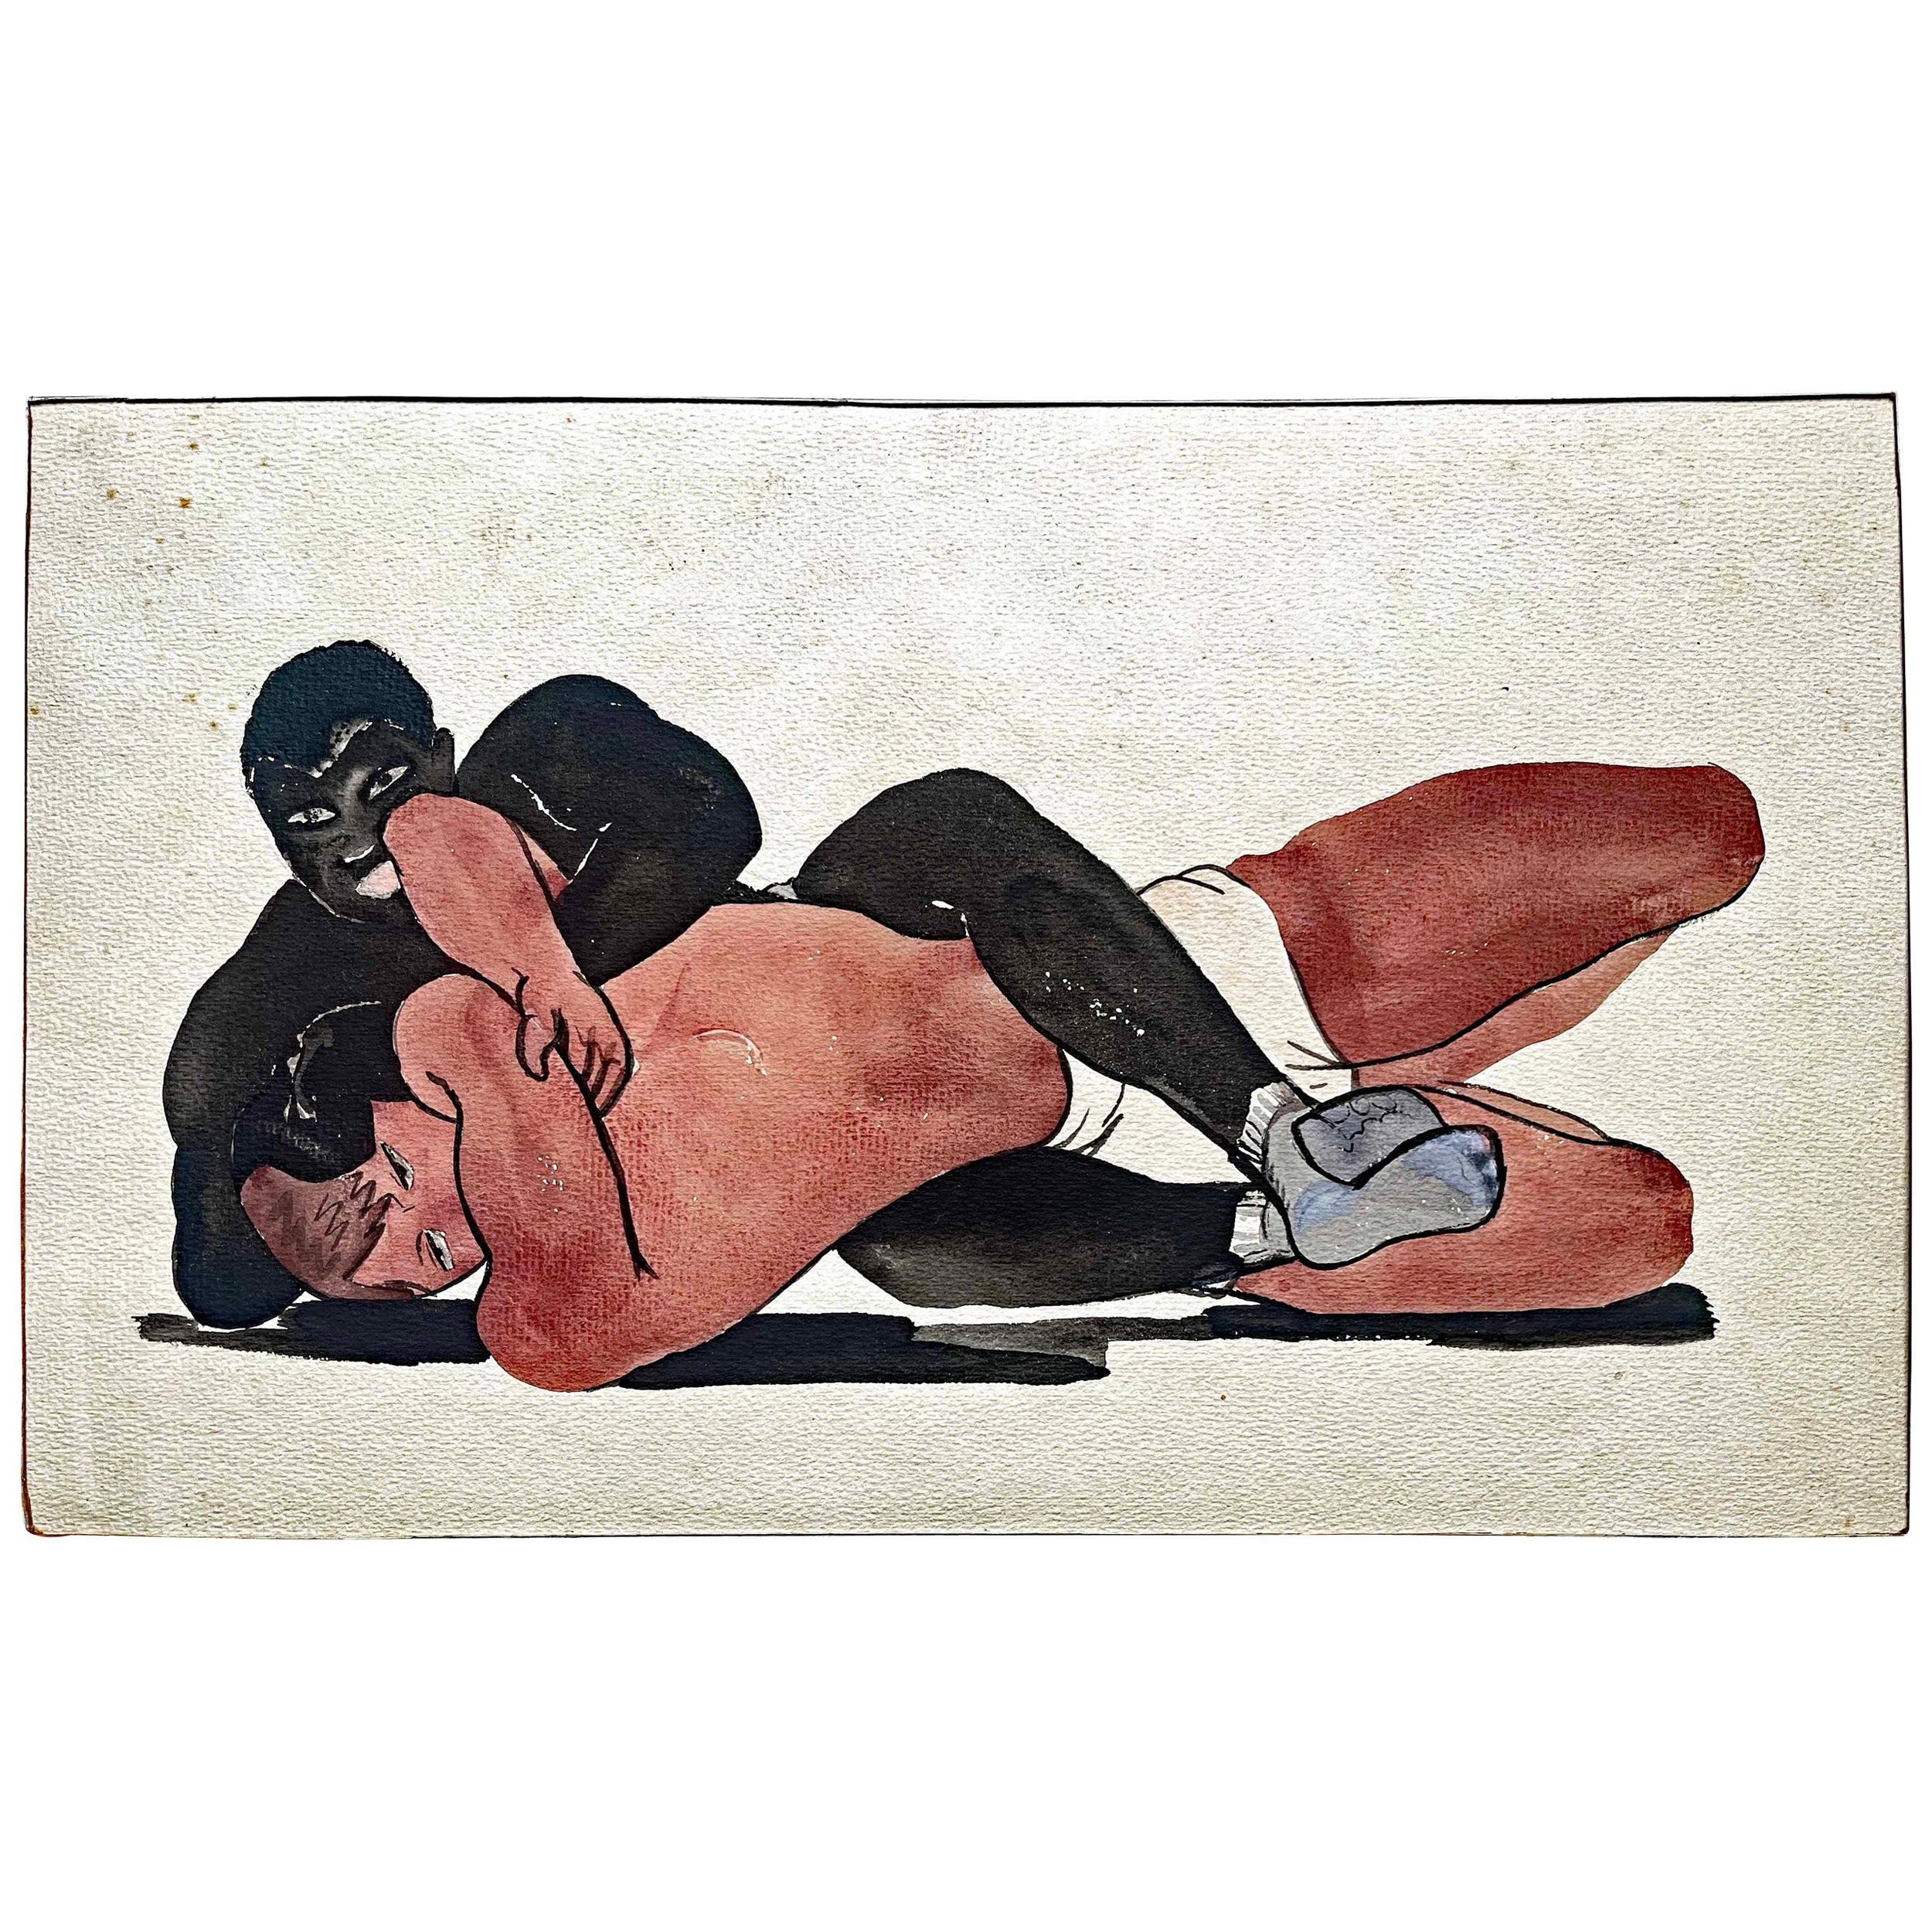 "Pinned Down", Wrestling Scene from Late 1920s by William L'Engle For Sale